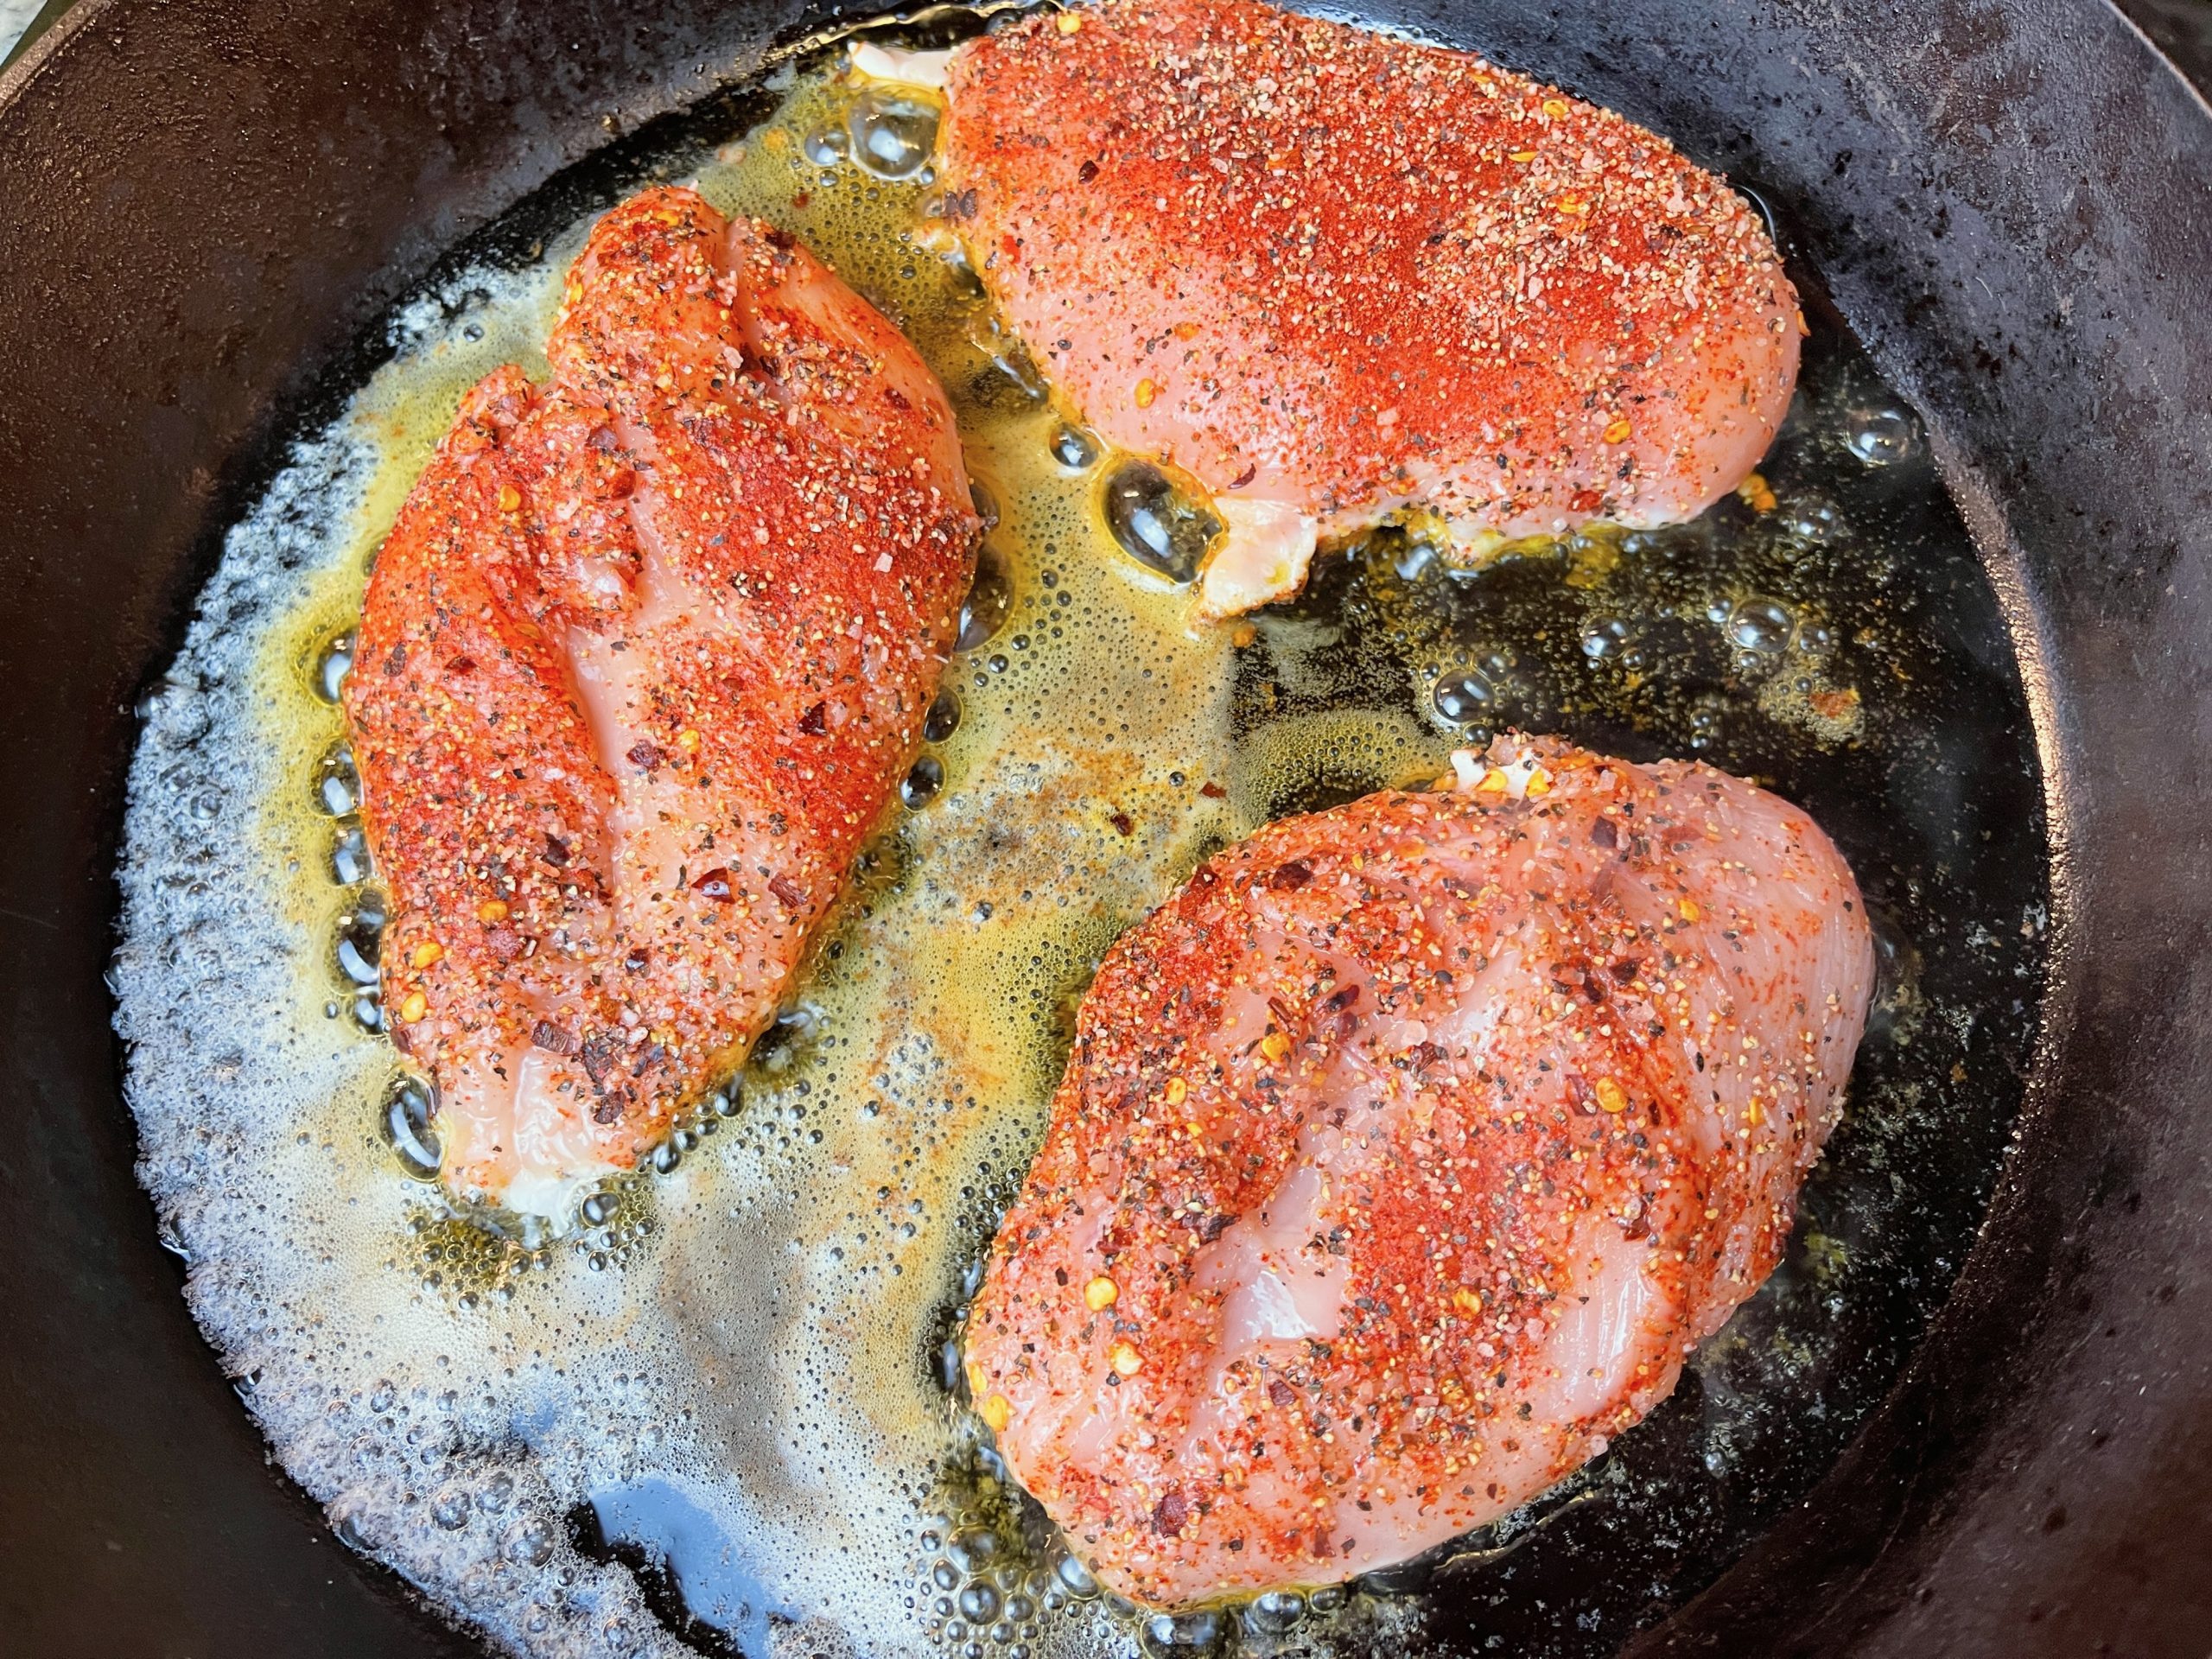 place chicken breasts in heated pan for 4-5 mins, until browned on one side